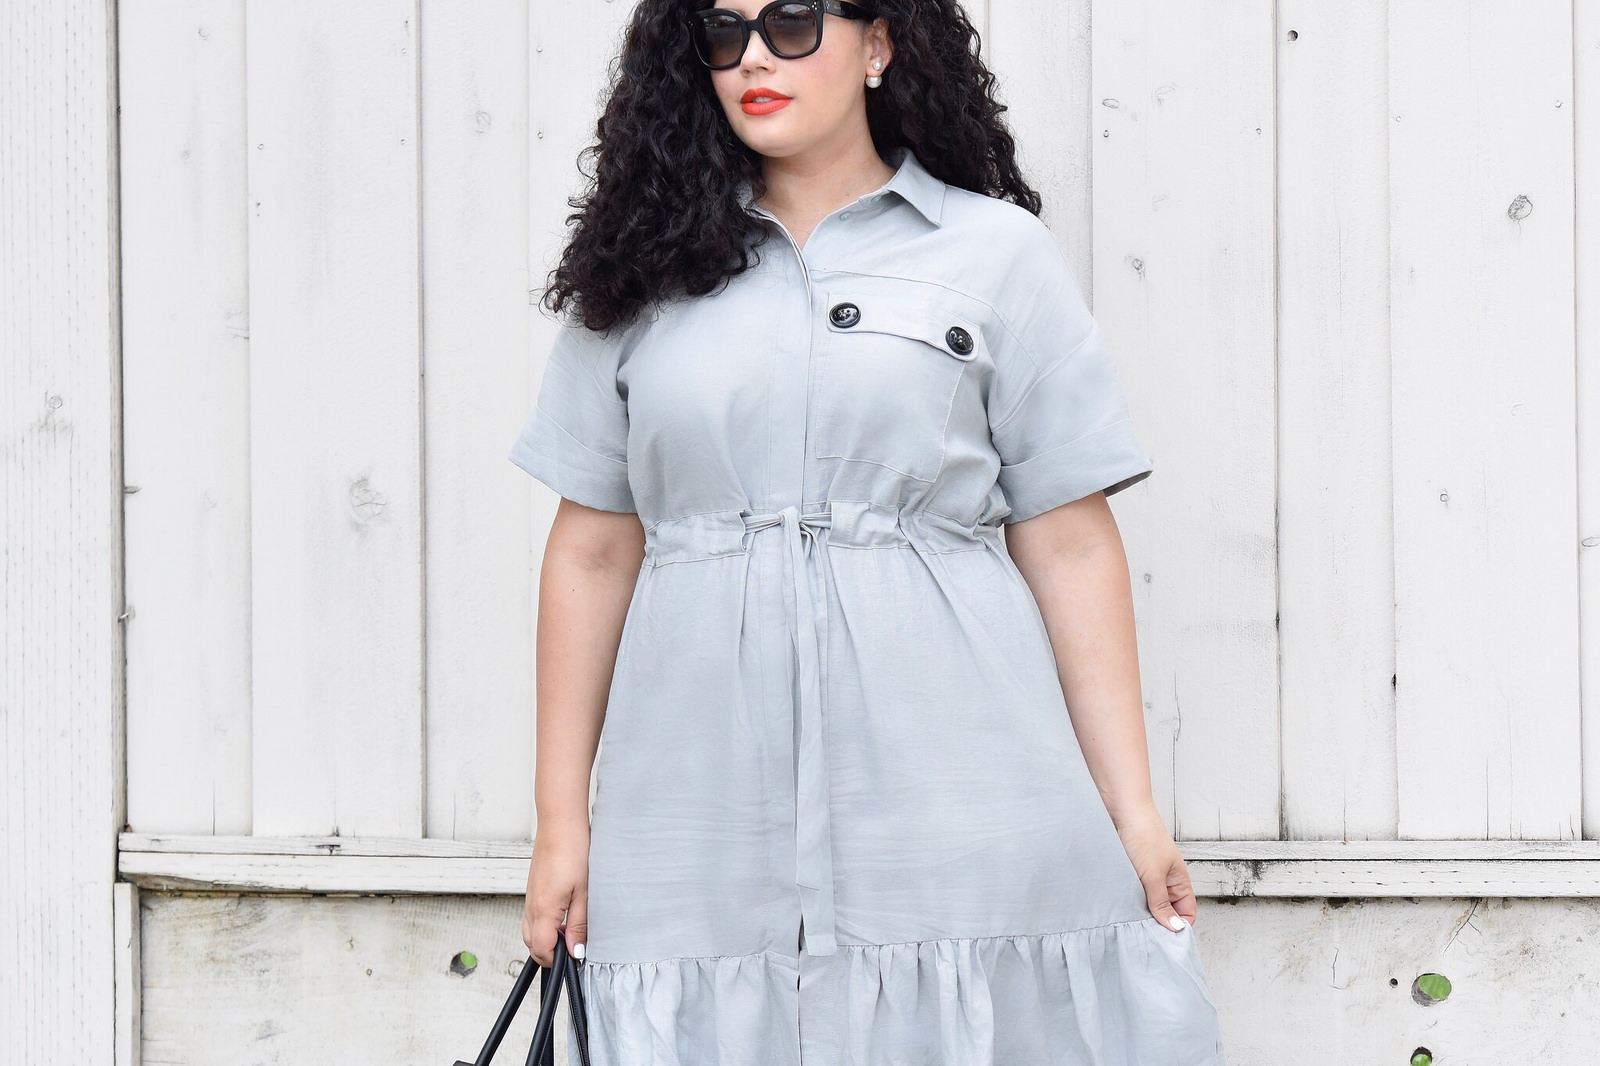 This Dress is a Must-Have via @GirlWithCurves #dresses #style #fashion